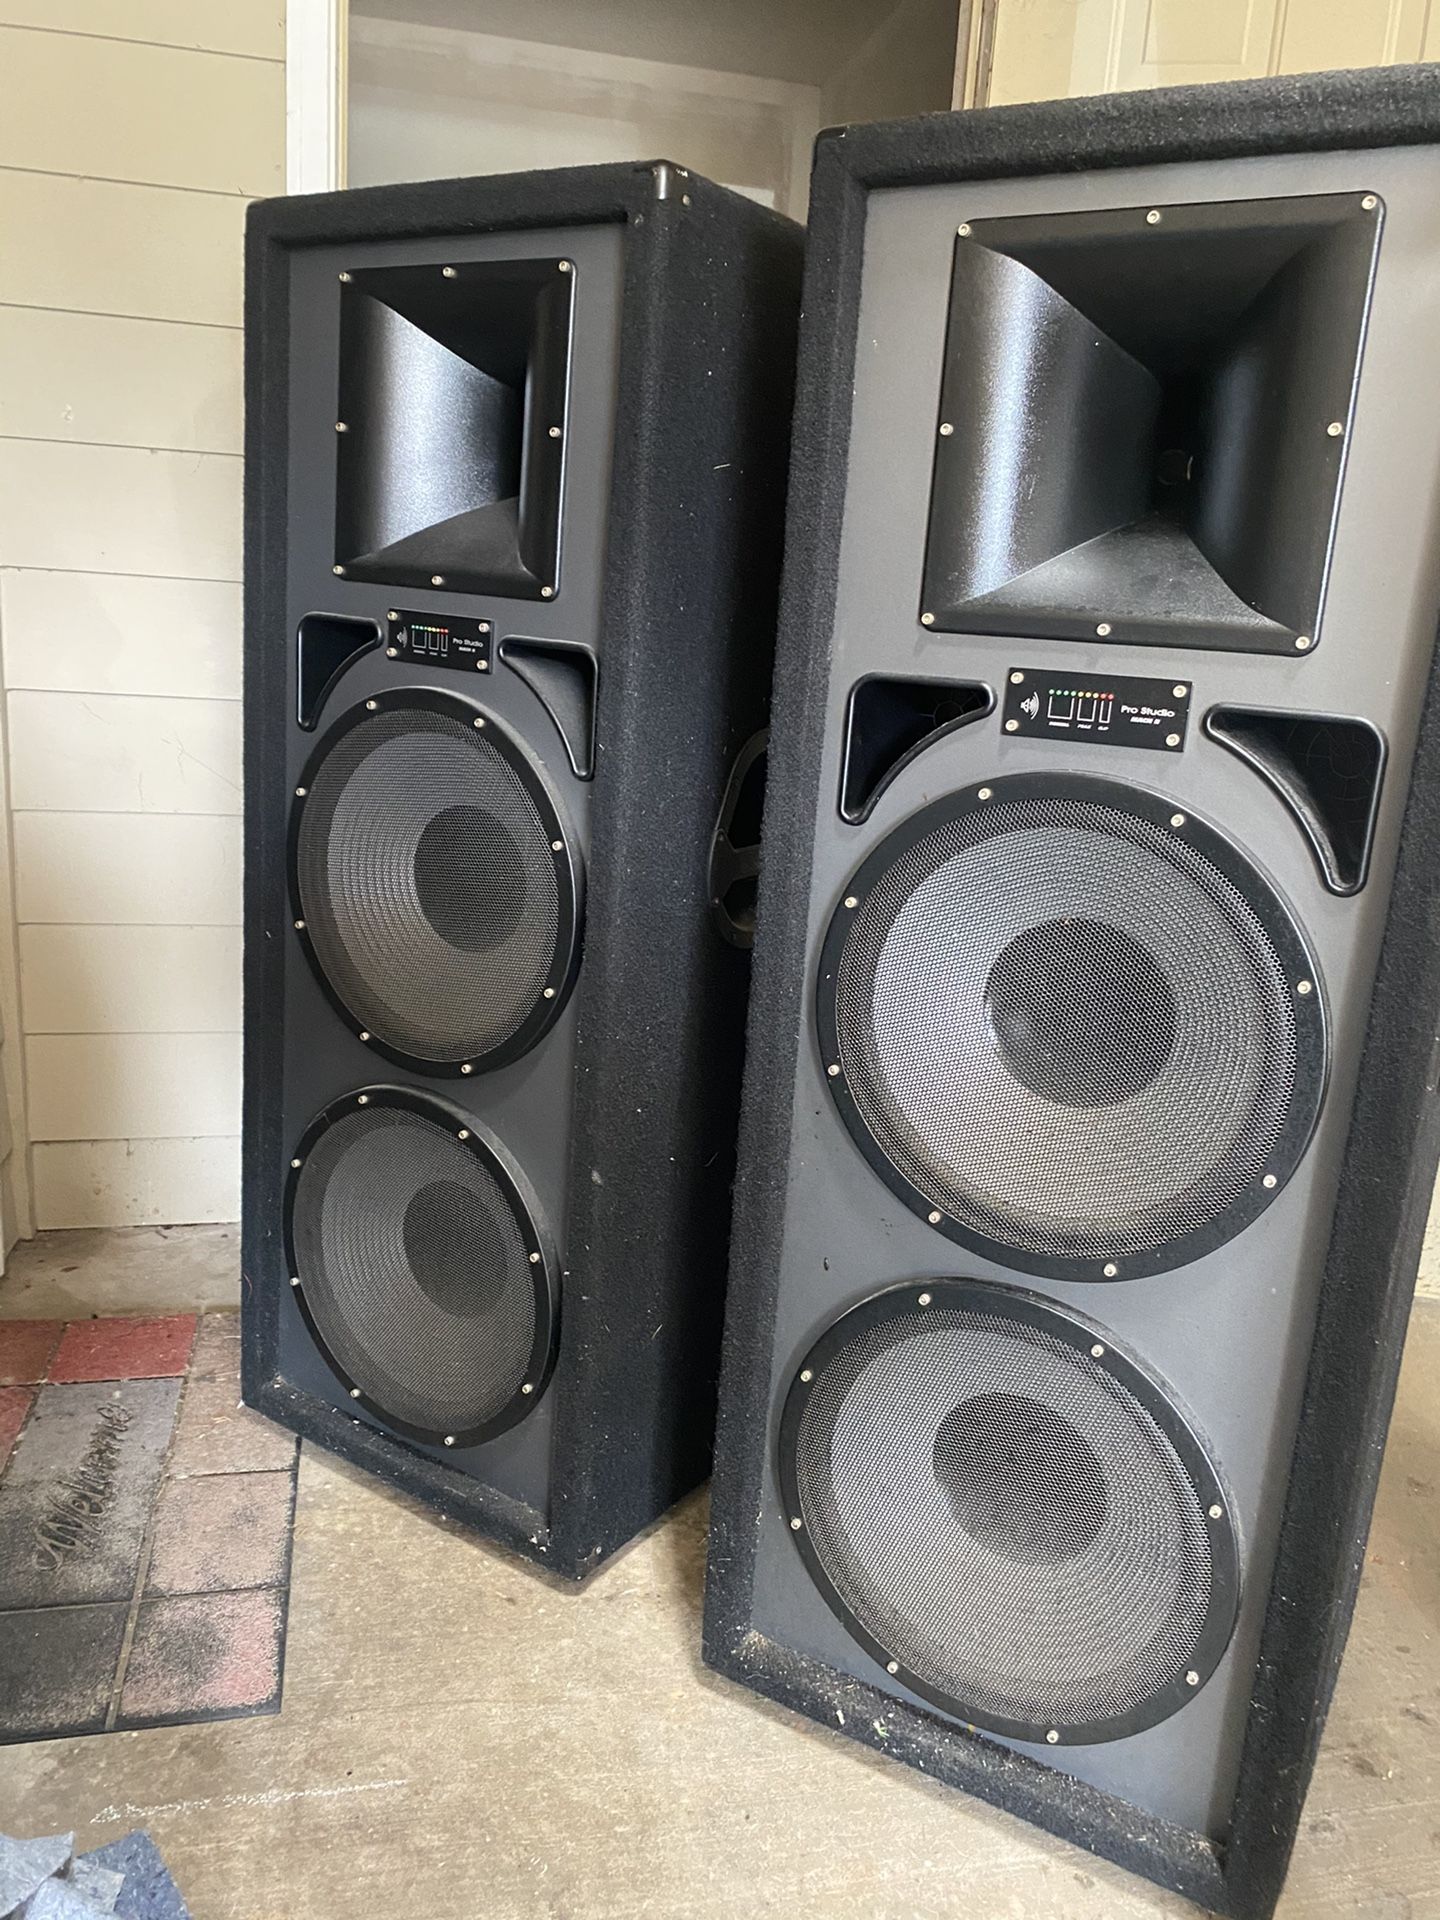 Pro studio speakers and Also with digital audio player